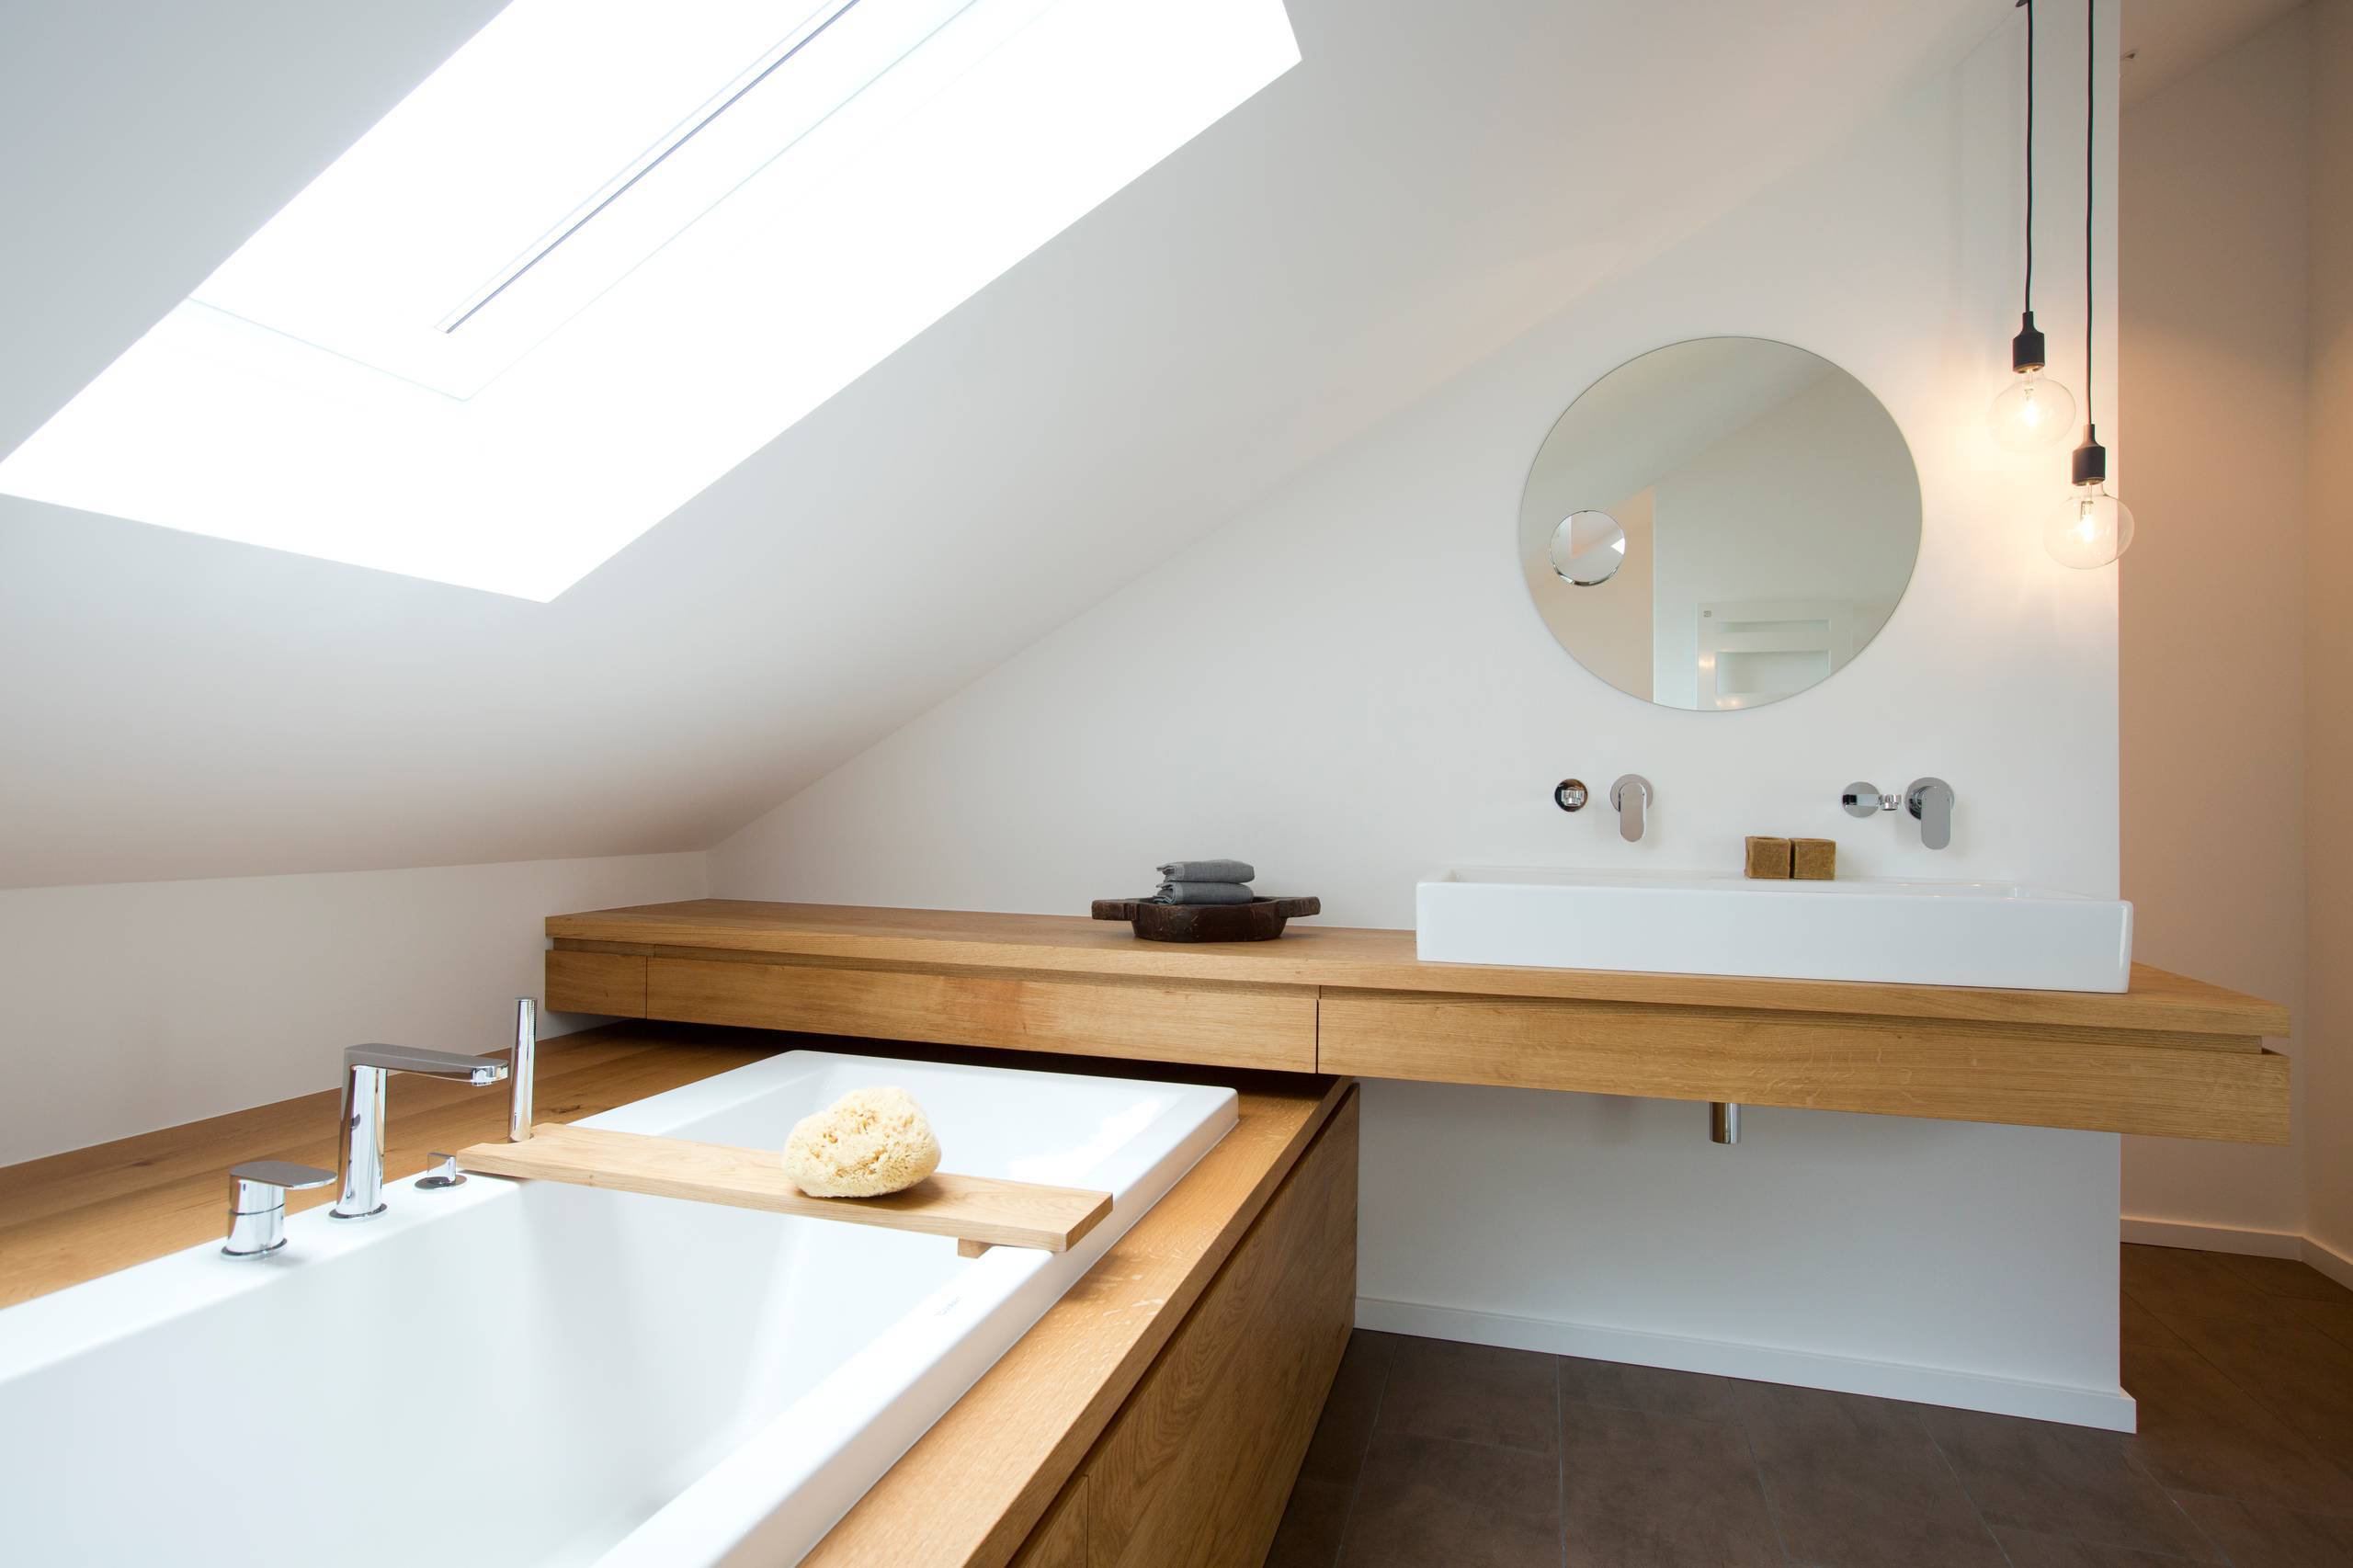 Cozy and relaxing bathroom (from Houzz)